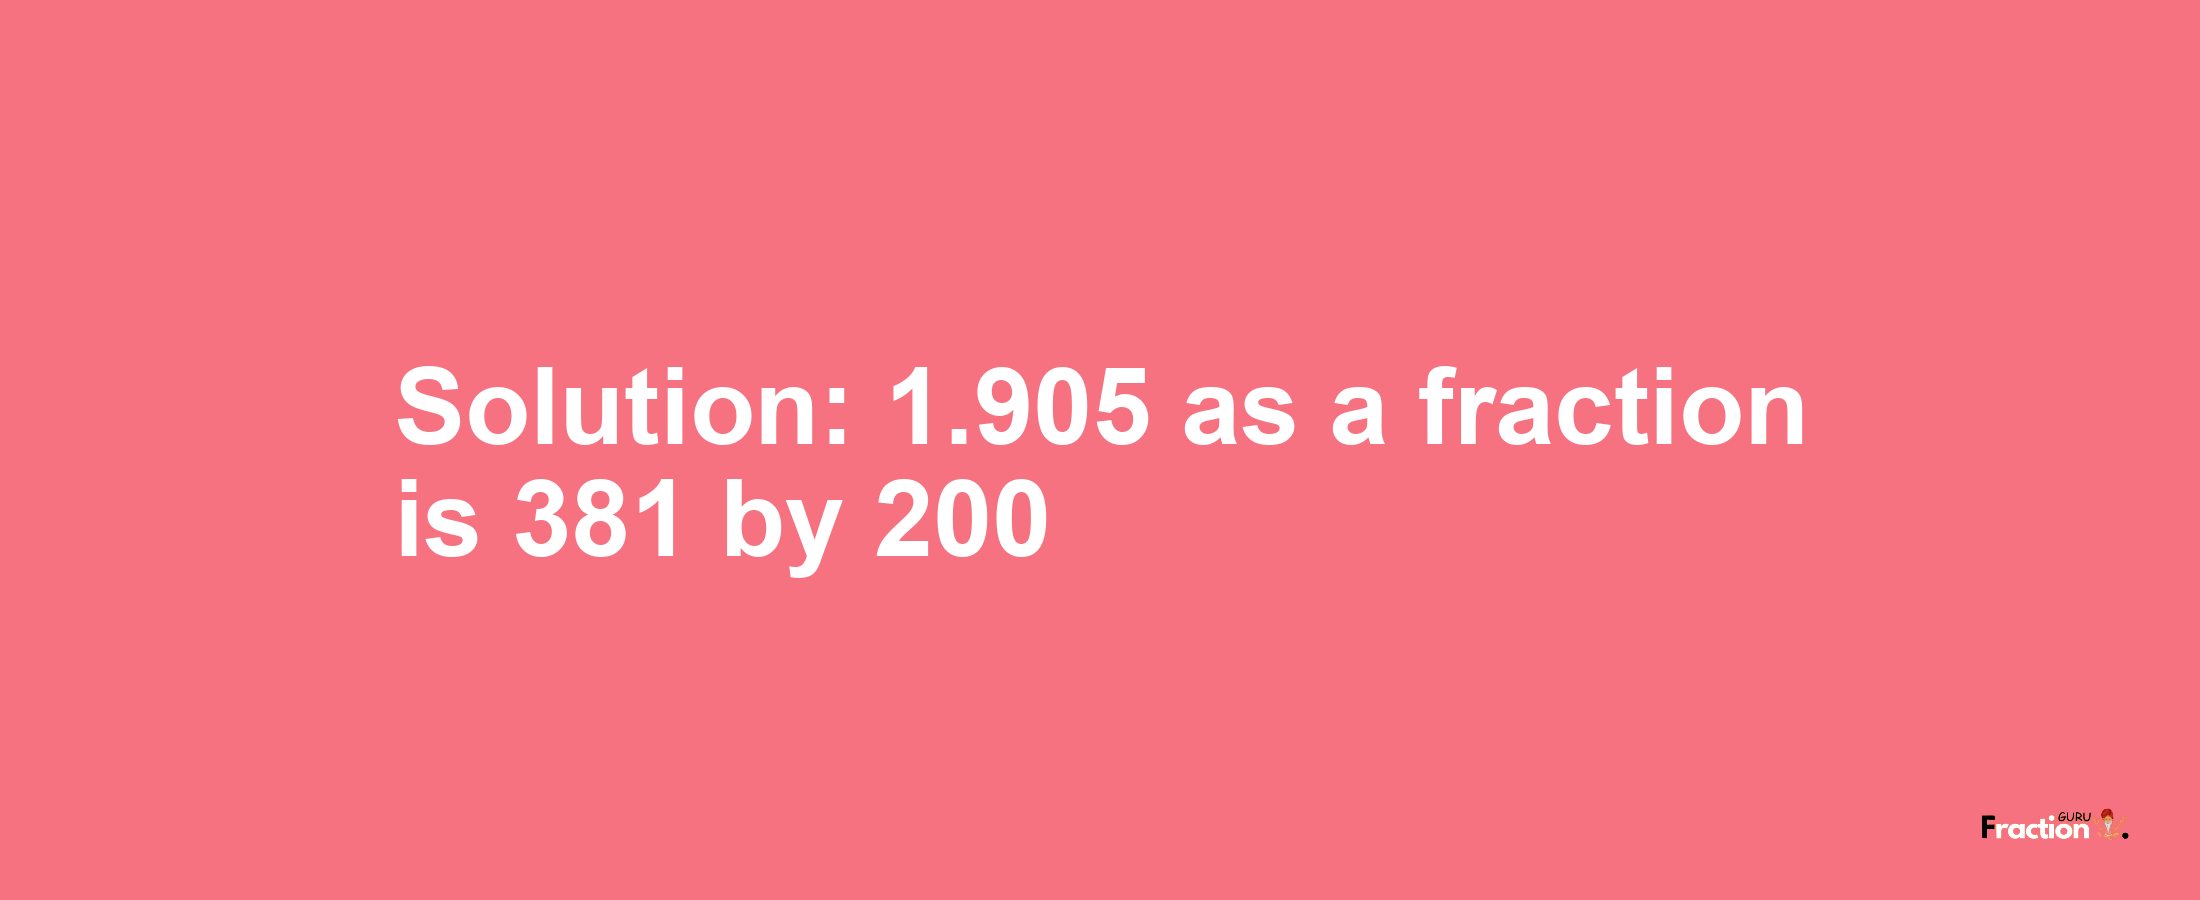 Solution:1.905 as a fraction is 381/200